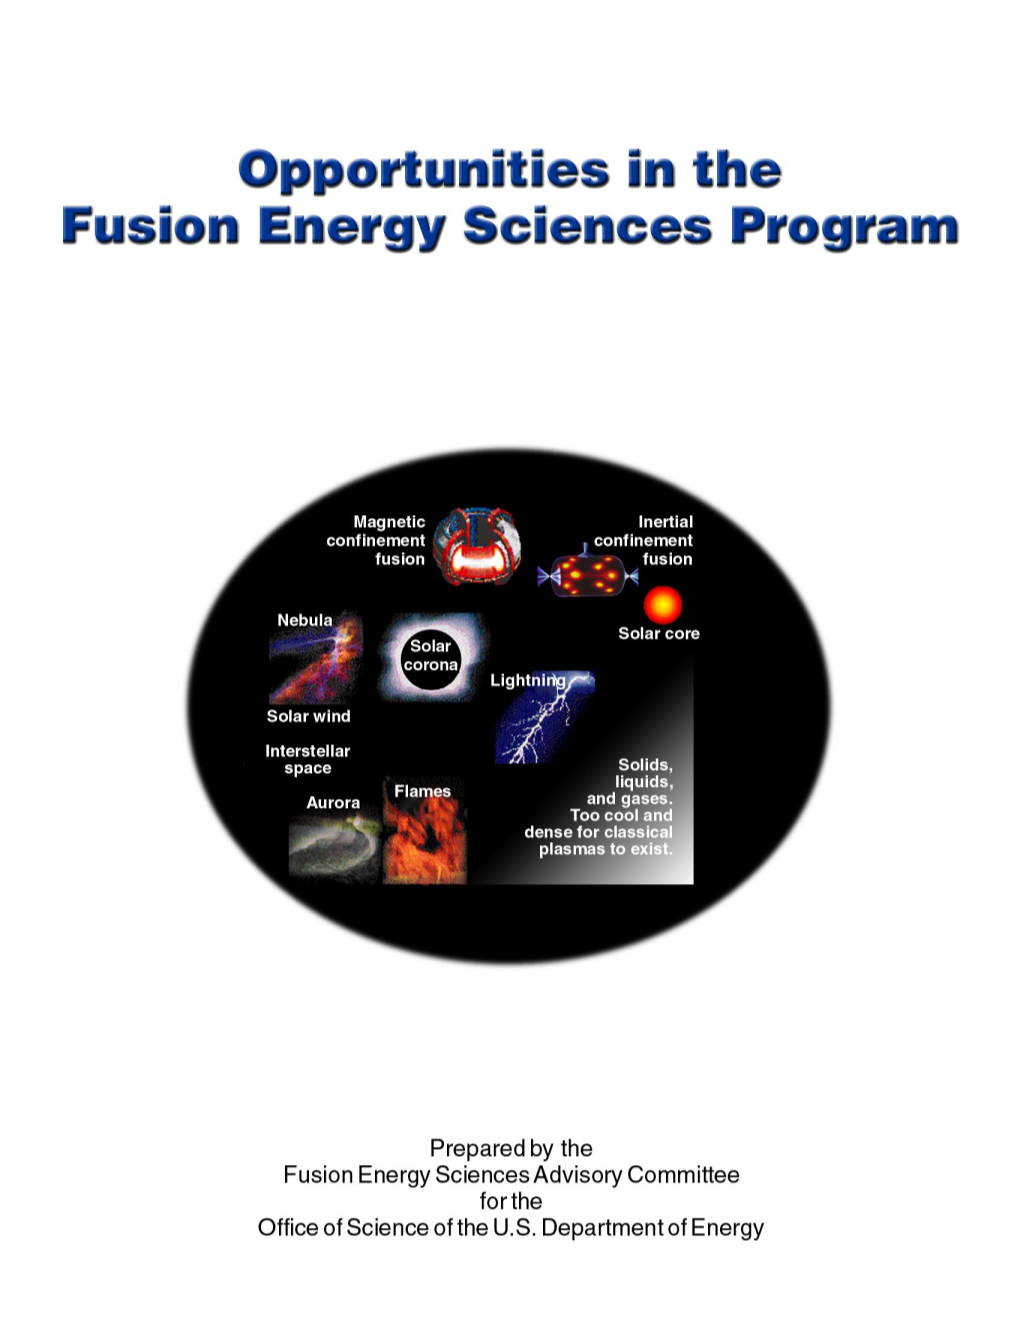 Opportunities in the Fusion Energy Sciences Program